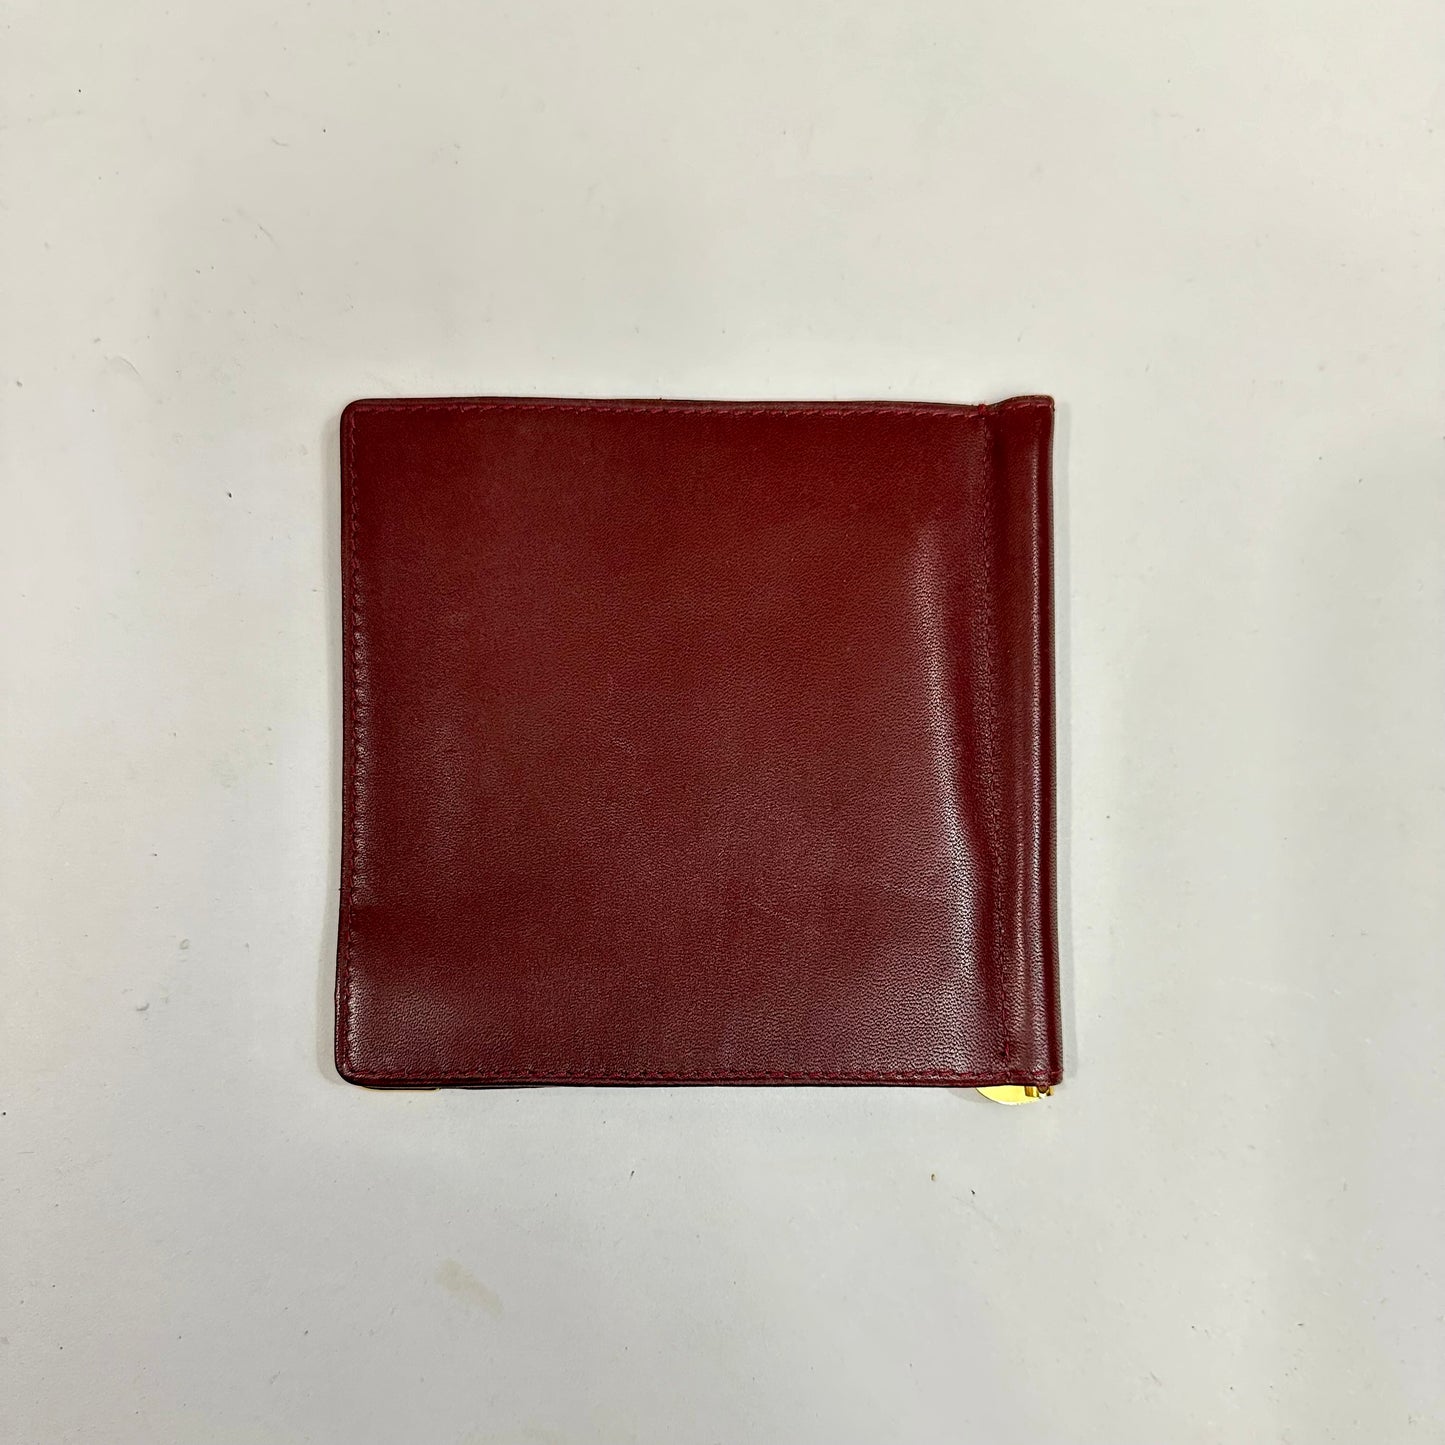 Vintage Cartier Bordeaux Leather Billfold Wallet with Money Clip